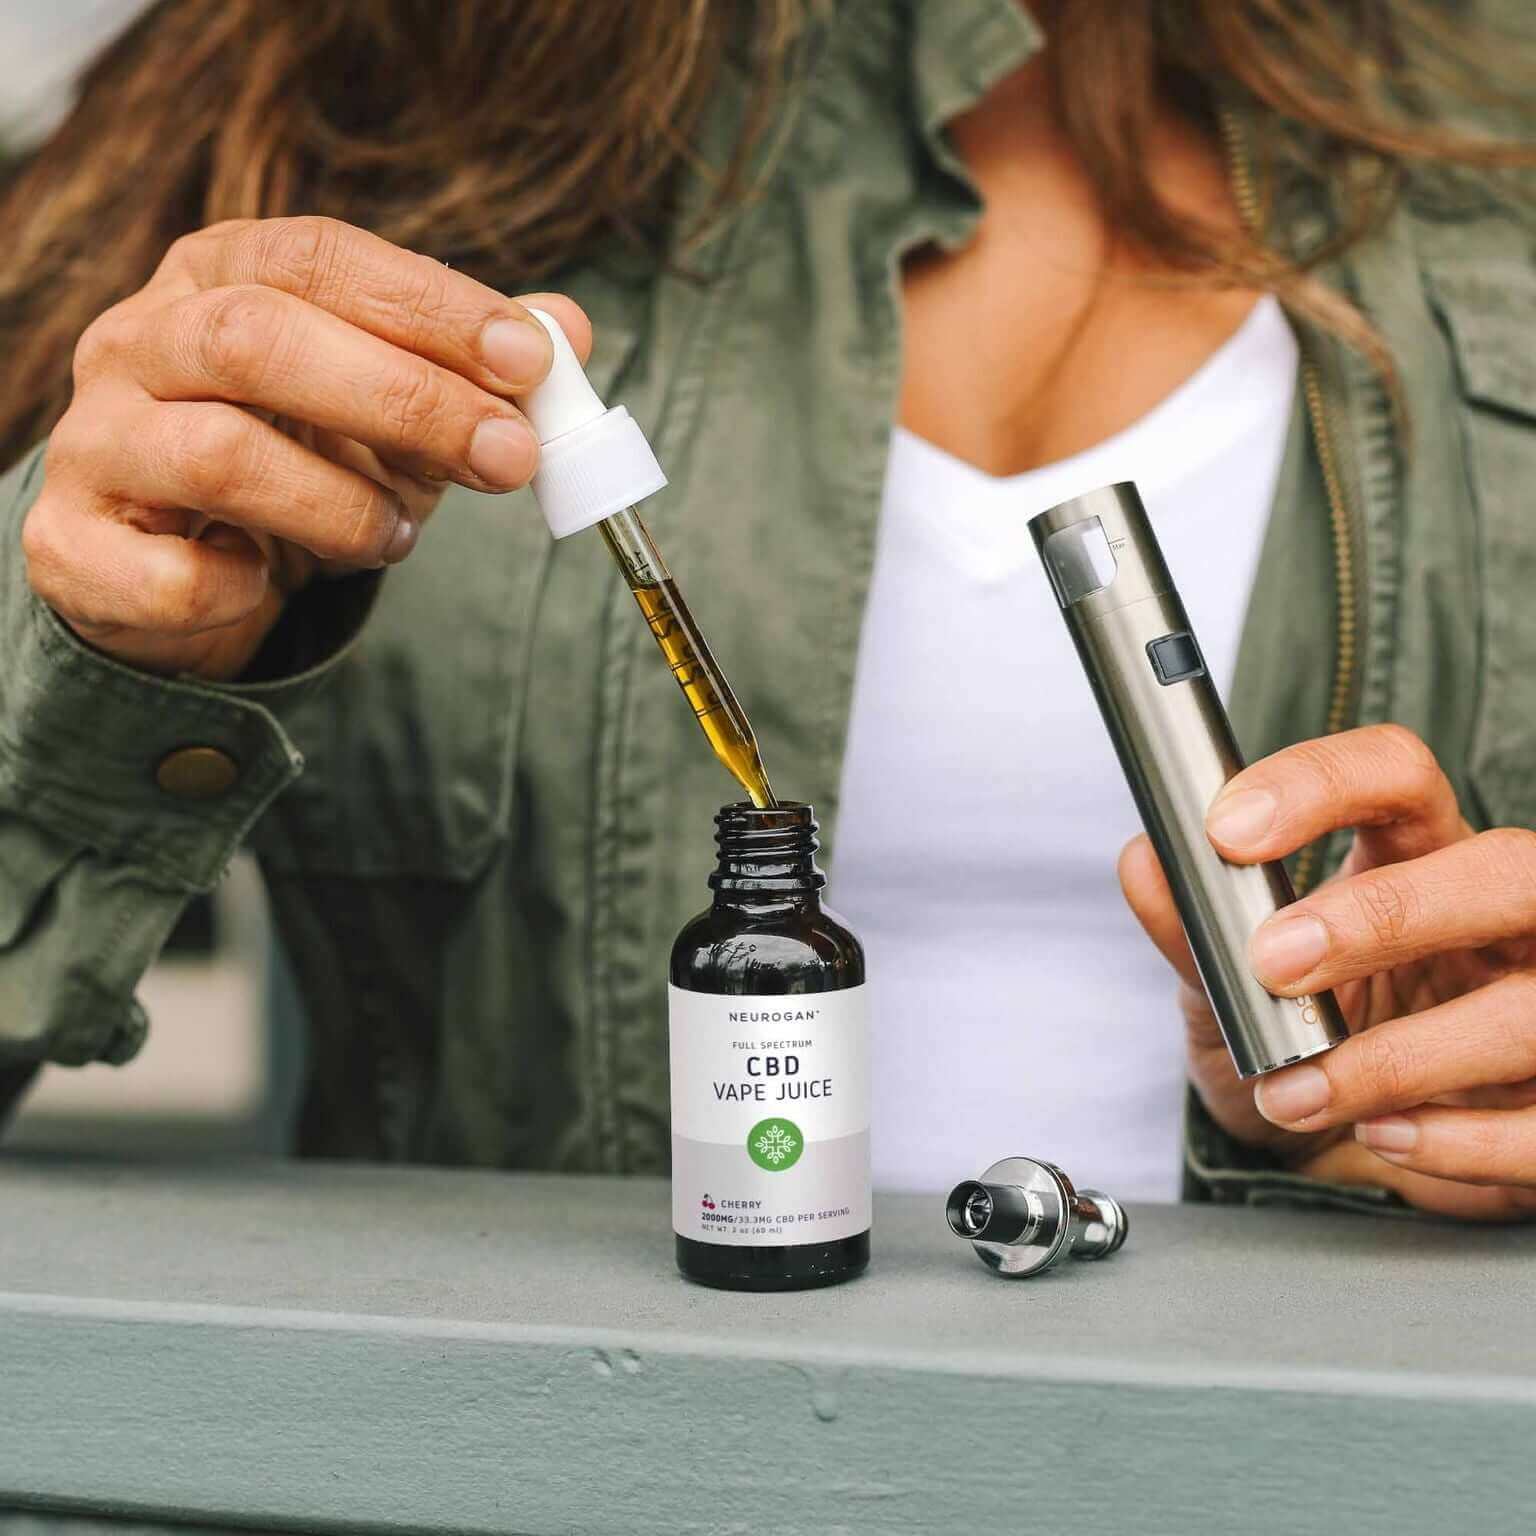 Woman filling up the dropper of CBD vape juice from the bottle